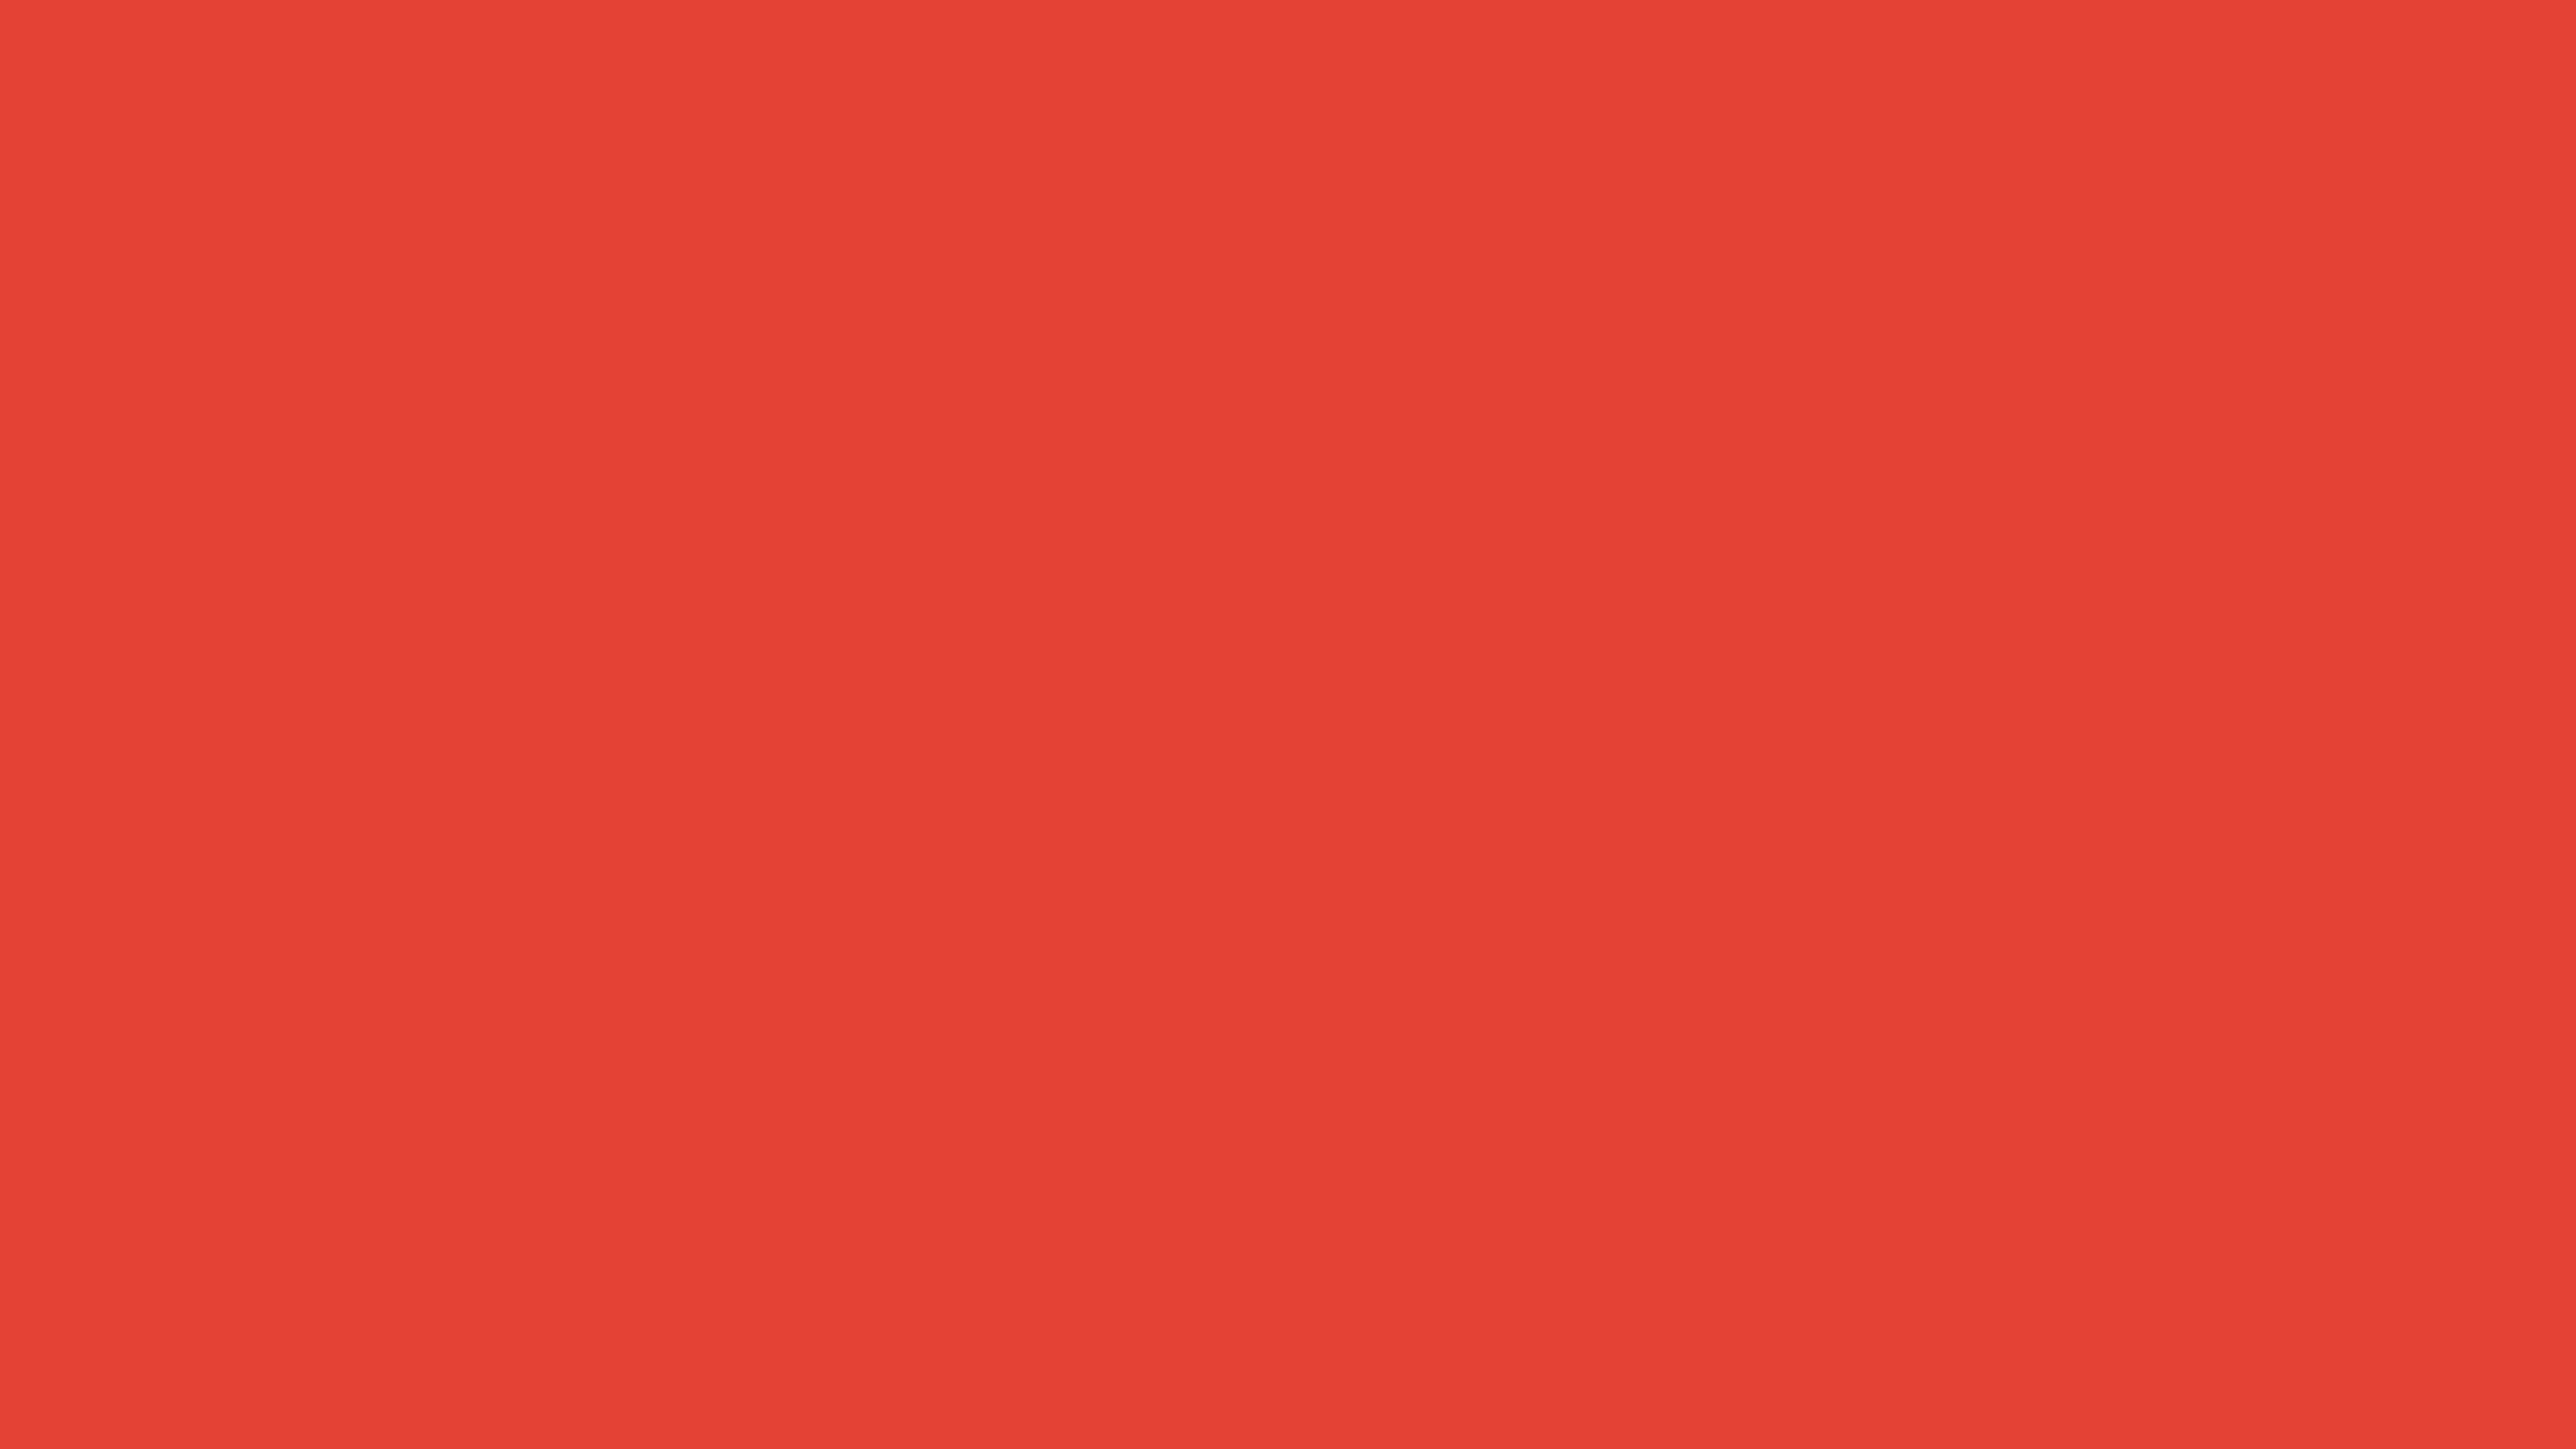 7680x4320 Cinnabar Solid Color Background